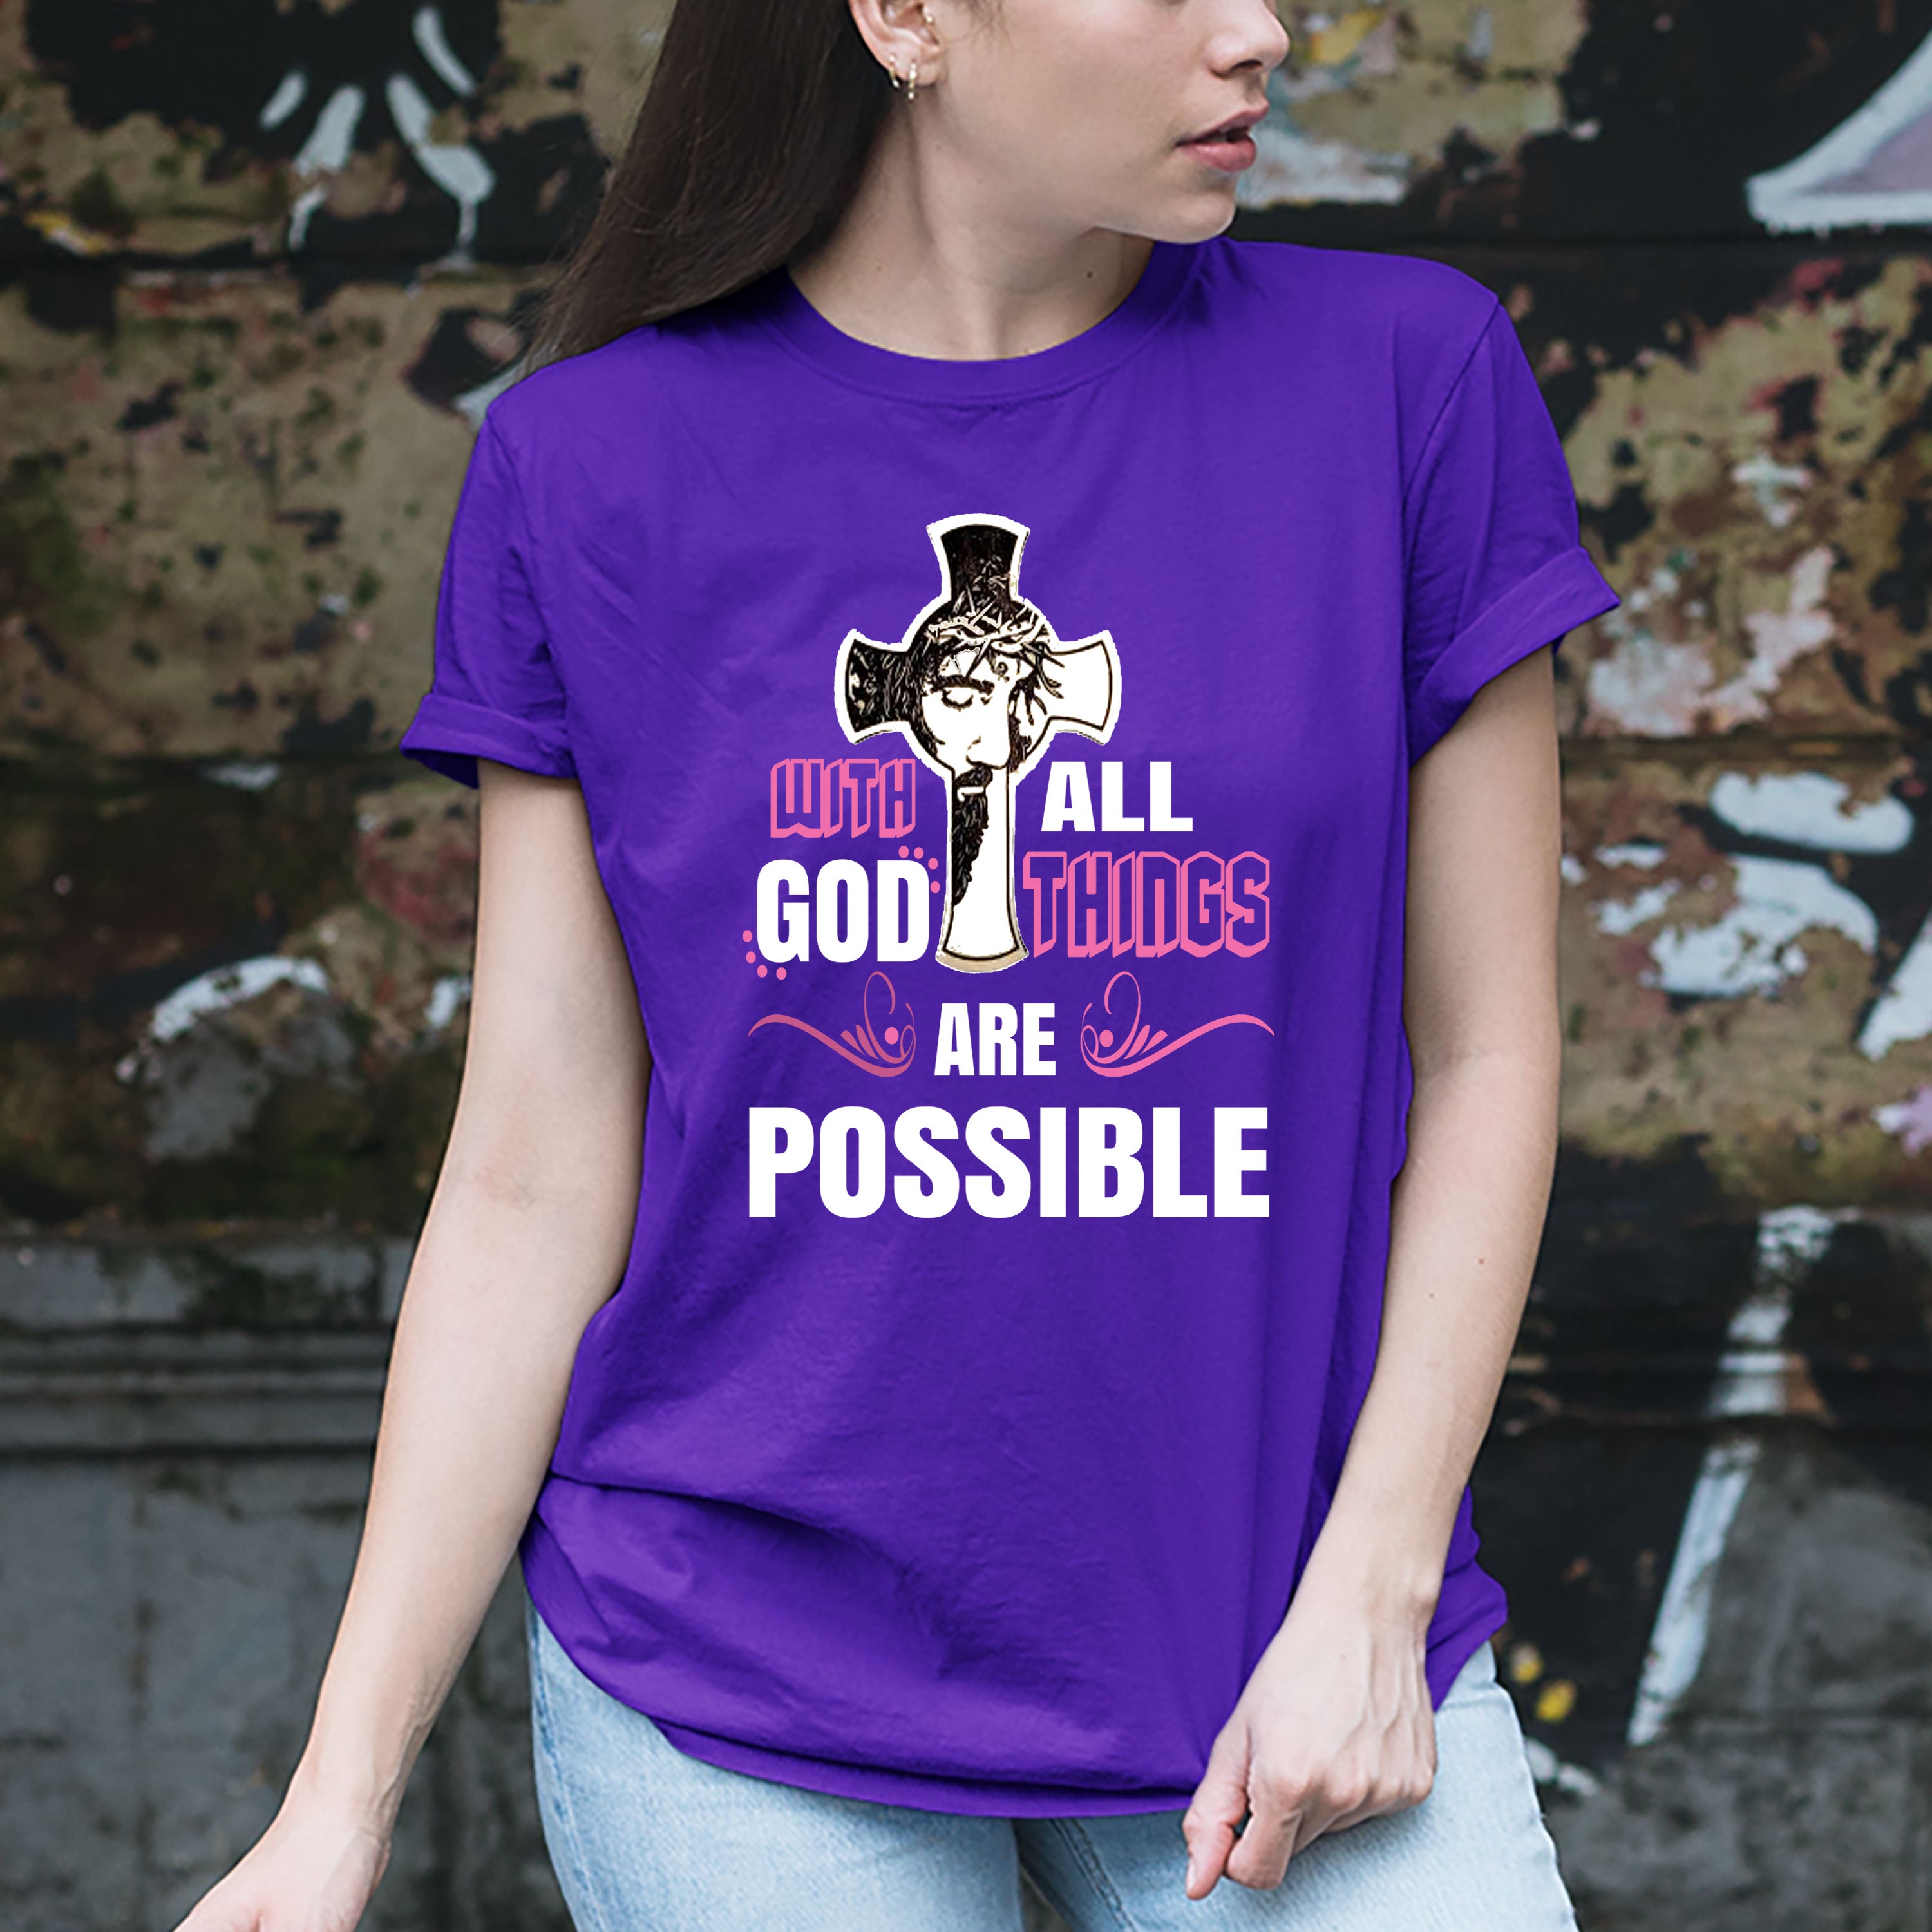 "WITH GOD ALL THINGS ARE POSSIBLE", T-SHIRT.